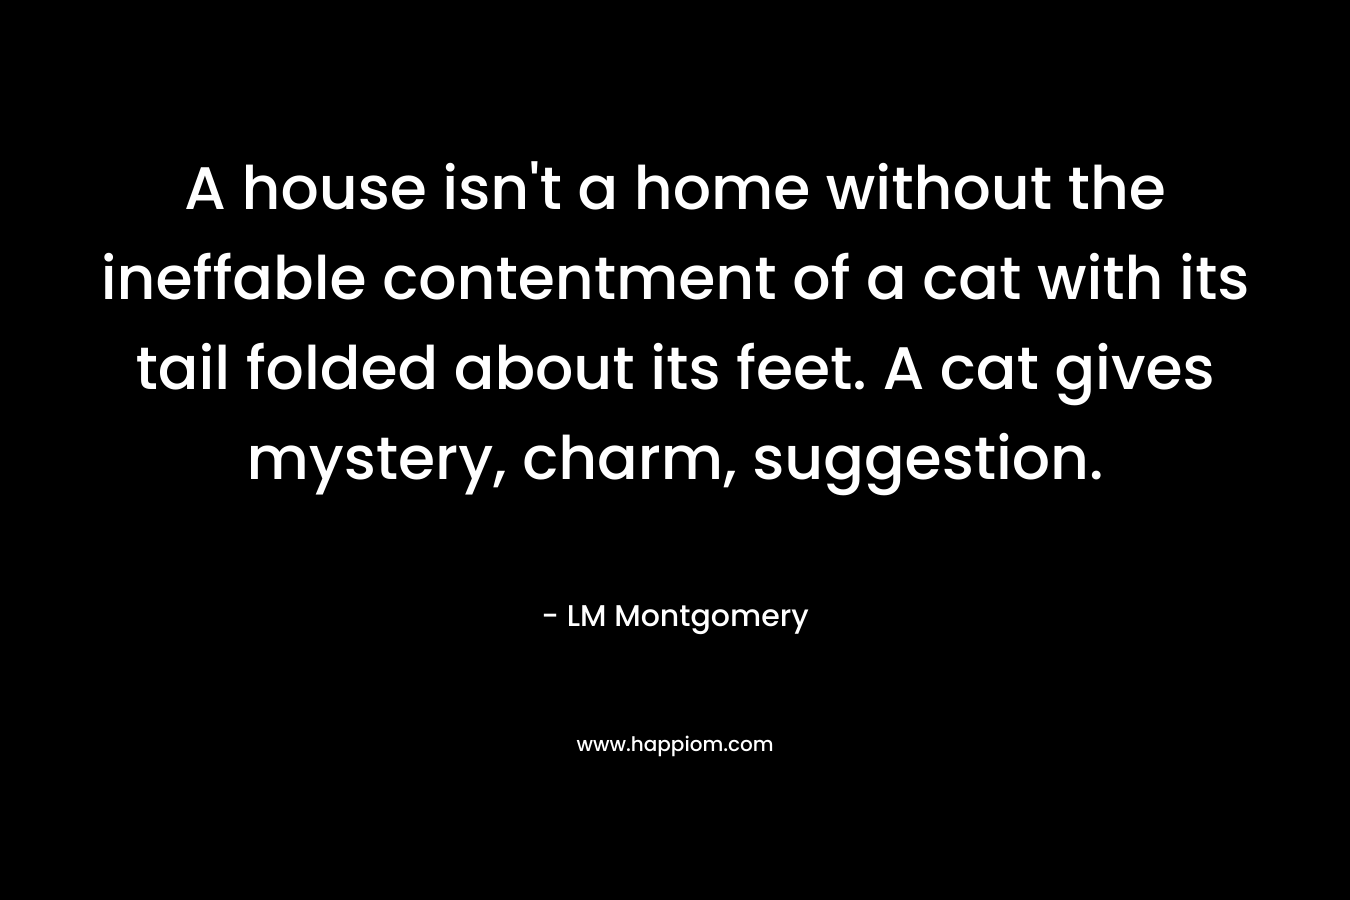 A house isn’t a home without the ineffable contentment of a cat with its tail folded about its feet. A cat gives mystery, charm, suggestion. – LM Montgomery